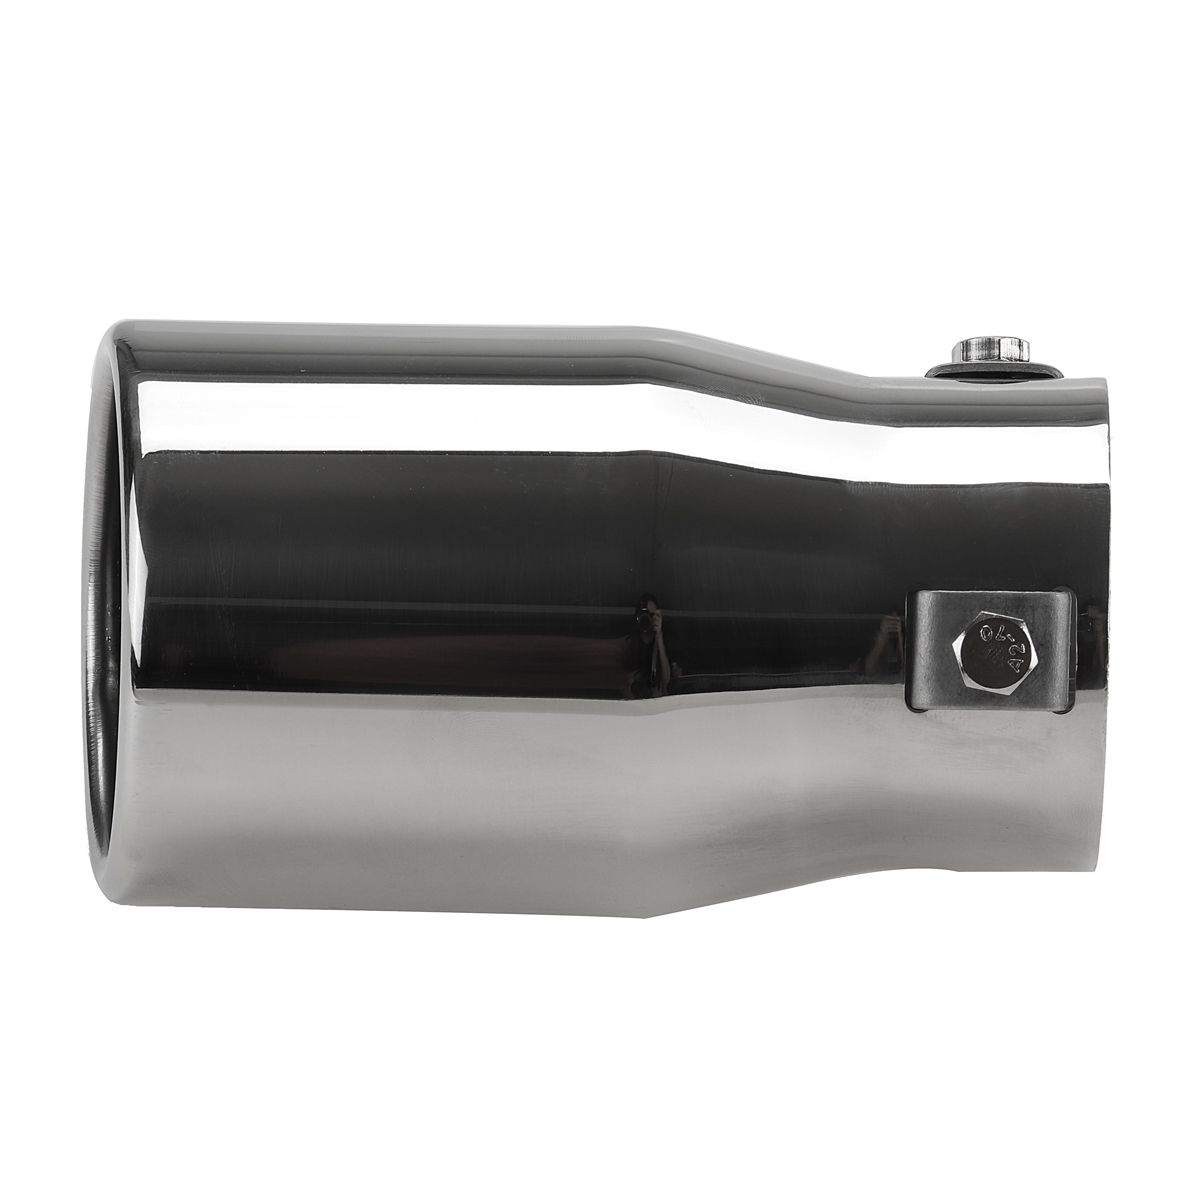 25-Inch-Inlet-Universal-Car-Auto-Exhaust-Muffler-Tip-Tail-Pipe-Stainless-Steel-1716270